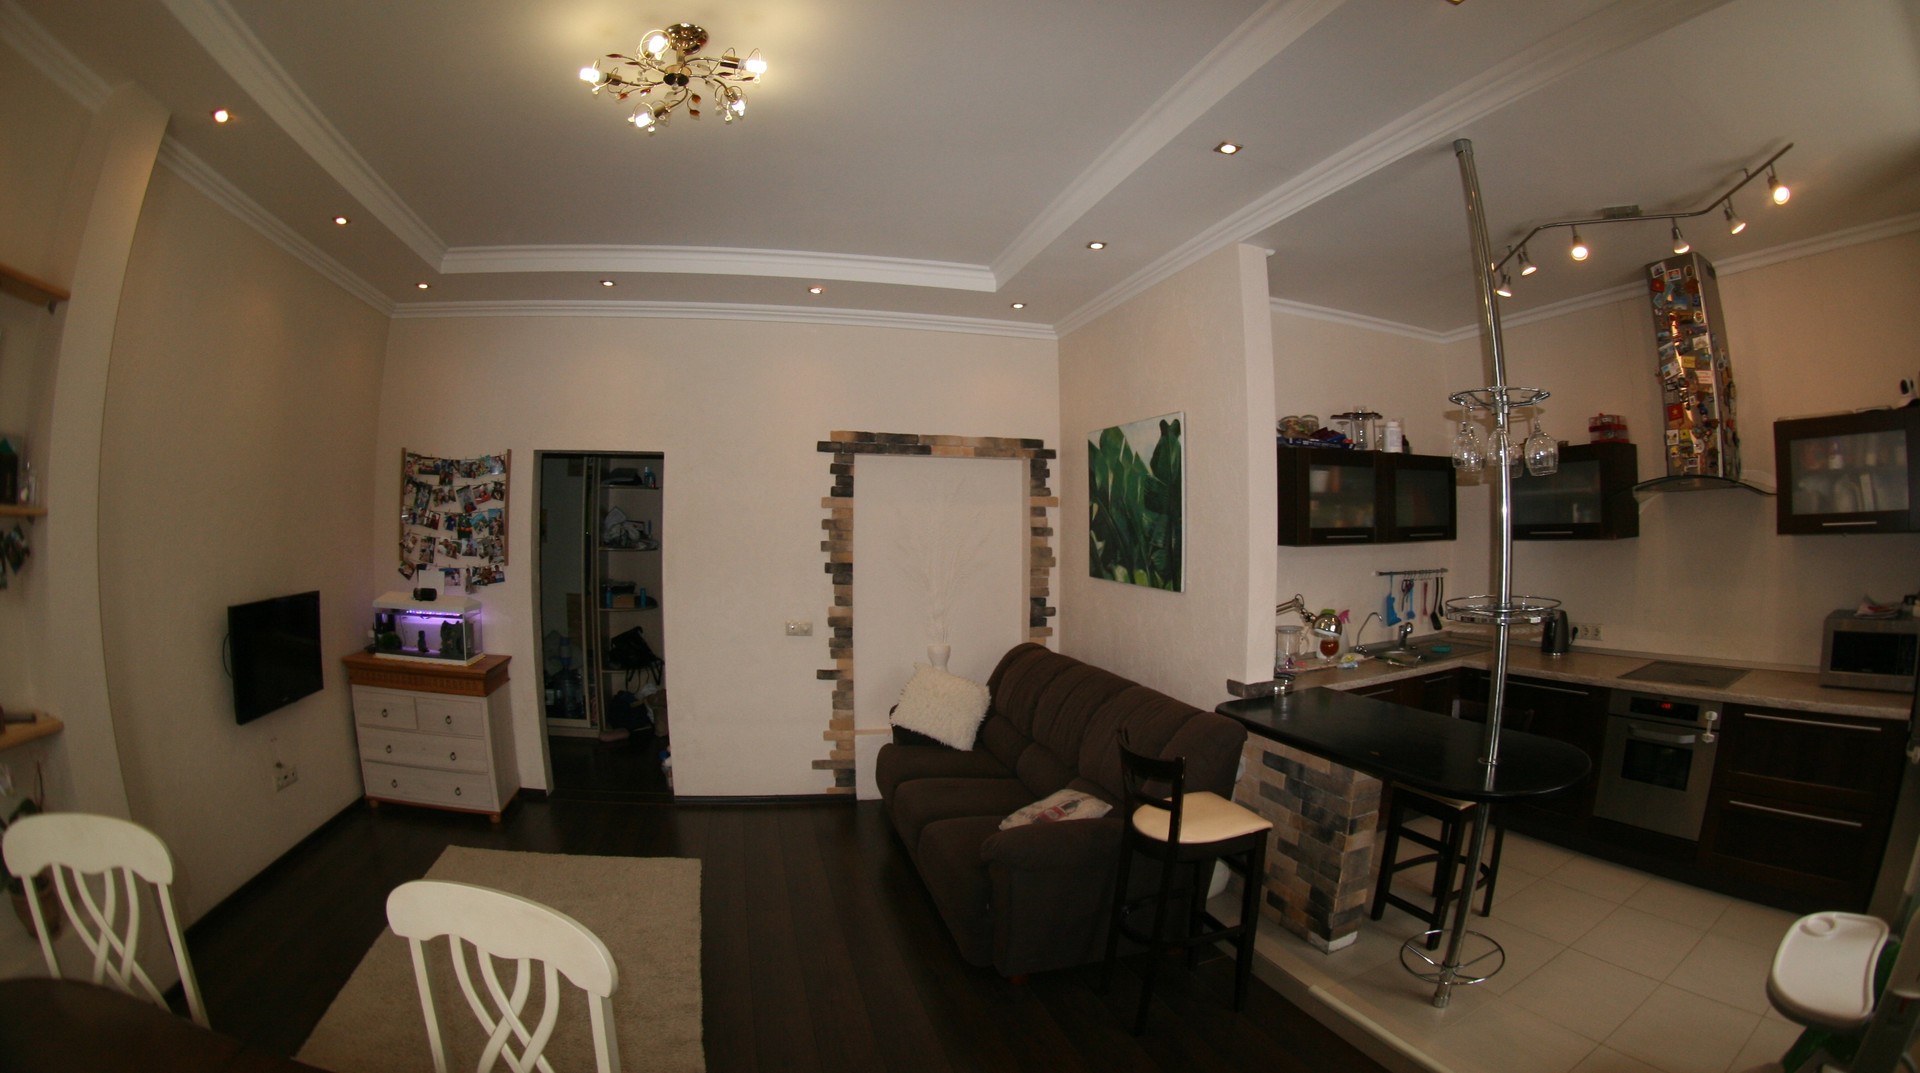 2-room apartment For sale in Moscow, 67 m²